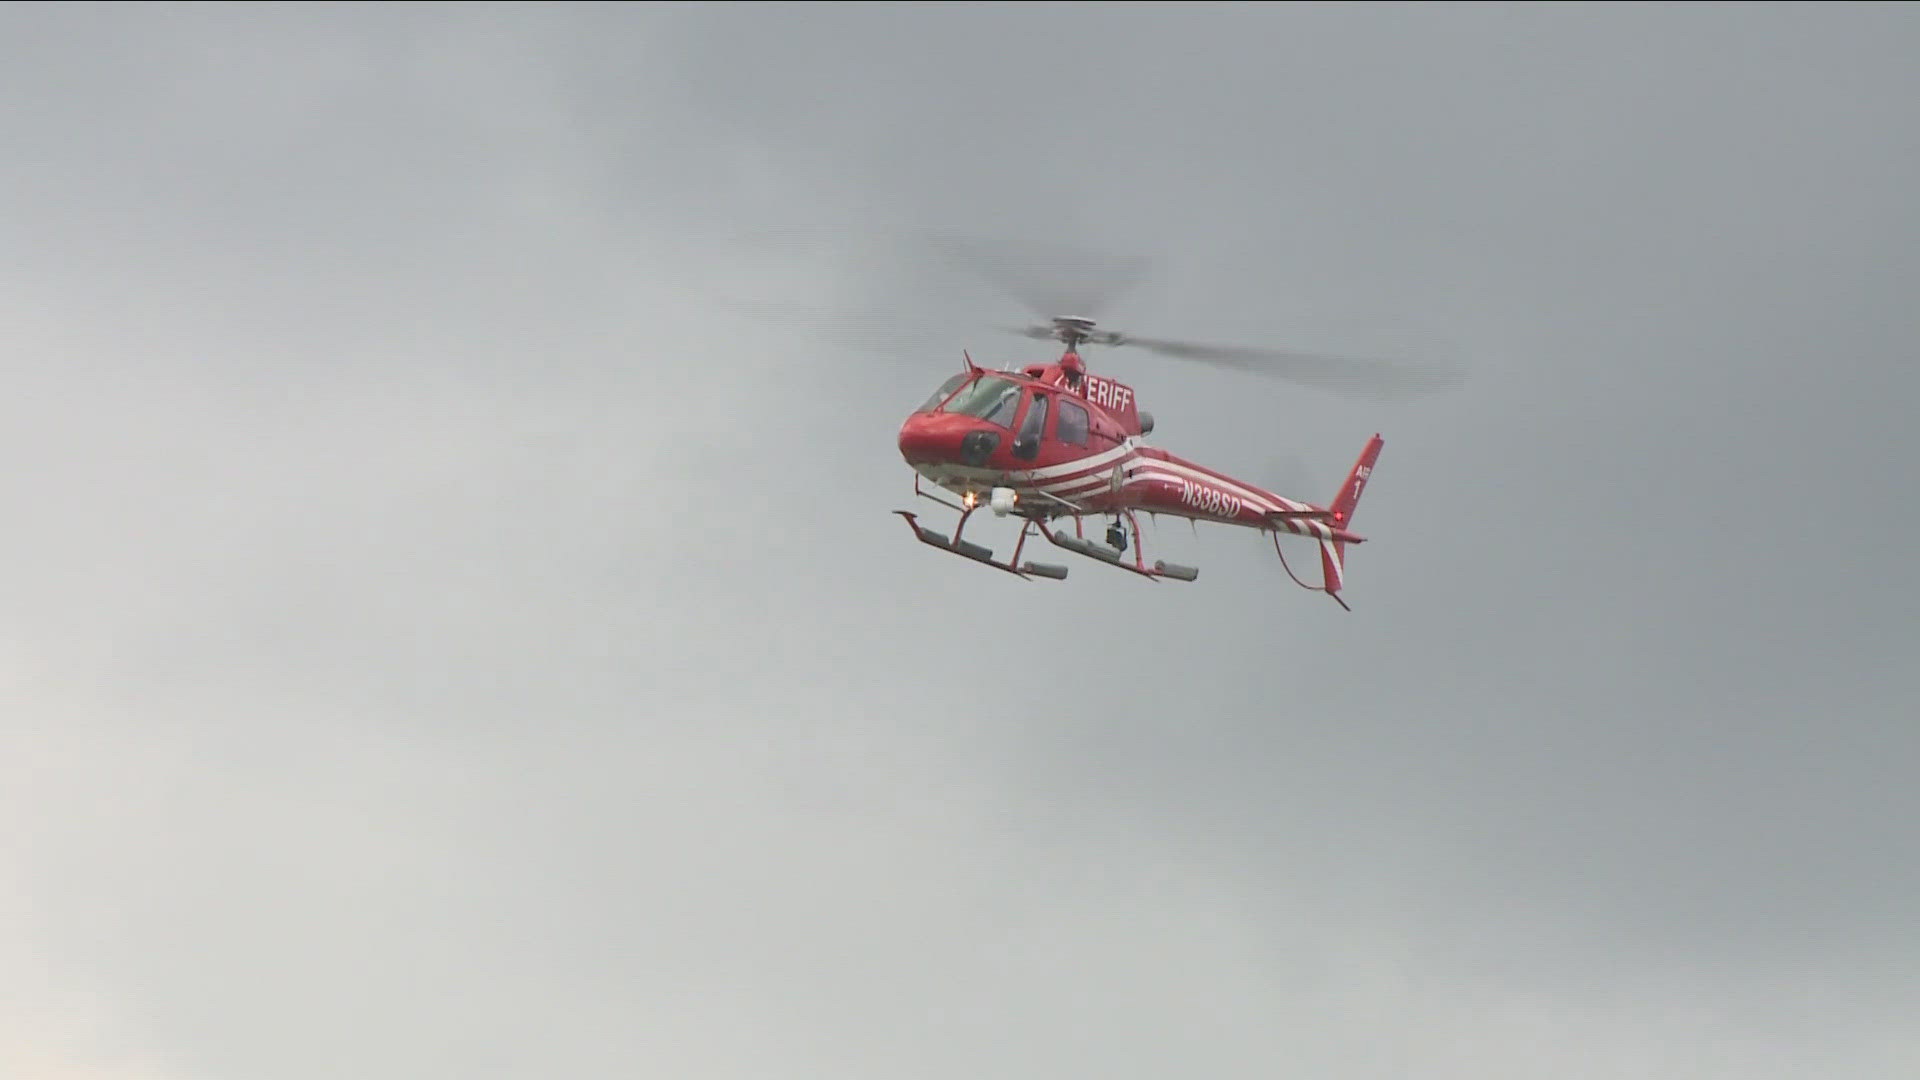 A missing elderly man was reunited with his family thanks to Erie County's use of the Air 1 helicopter.